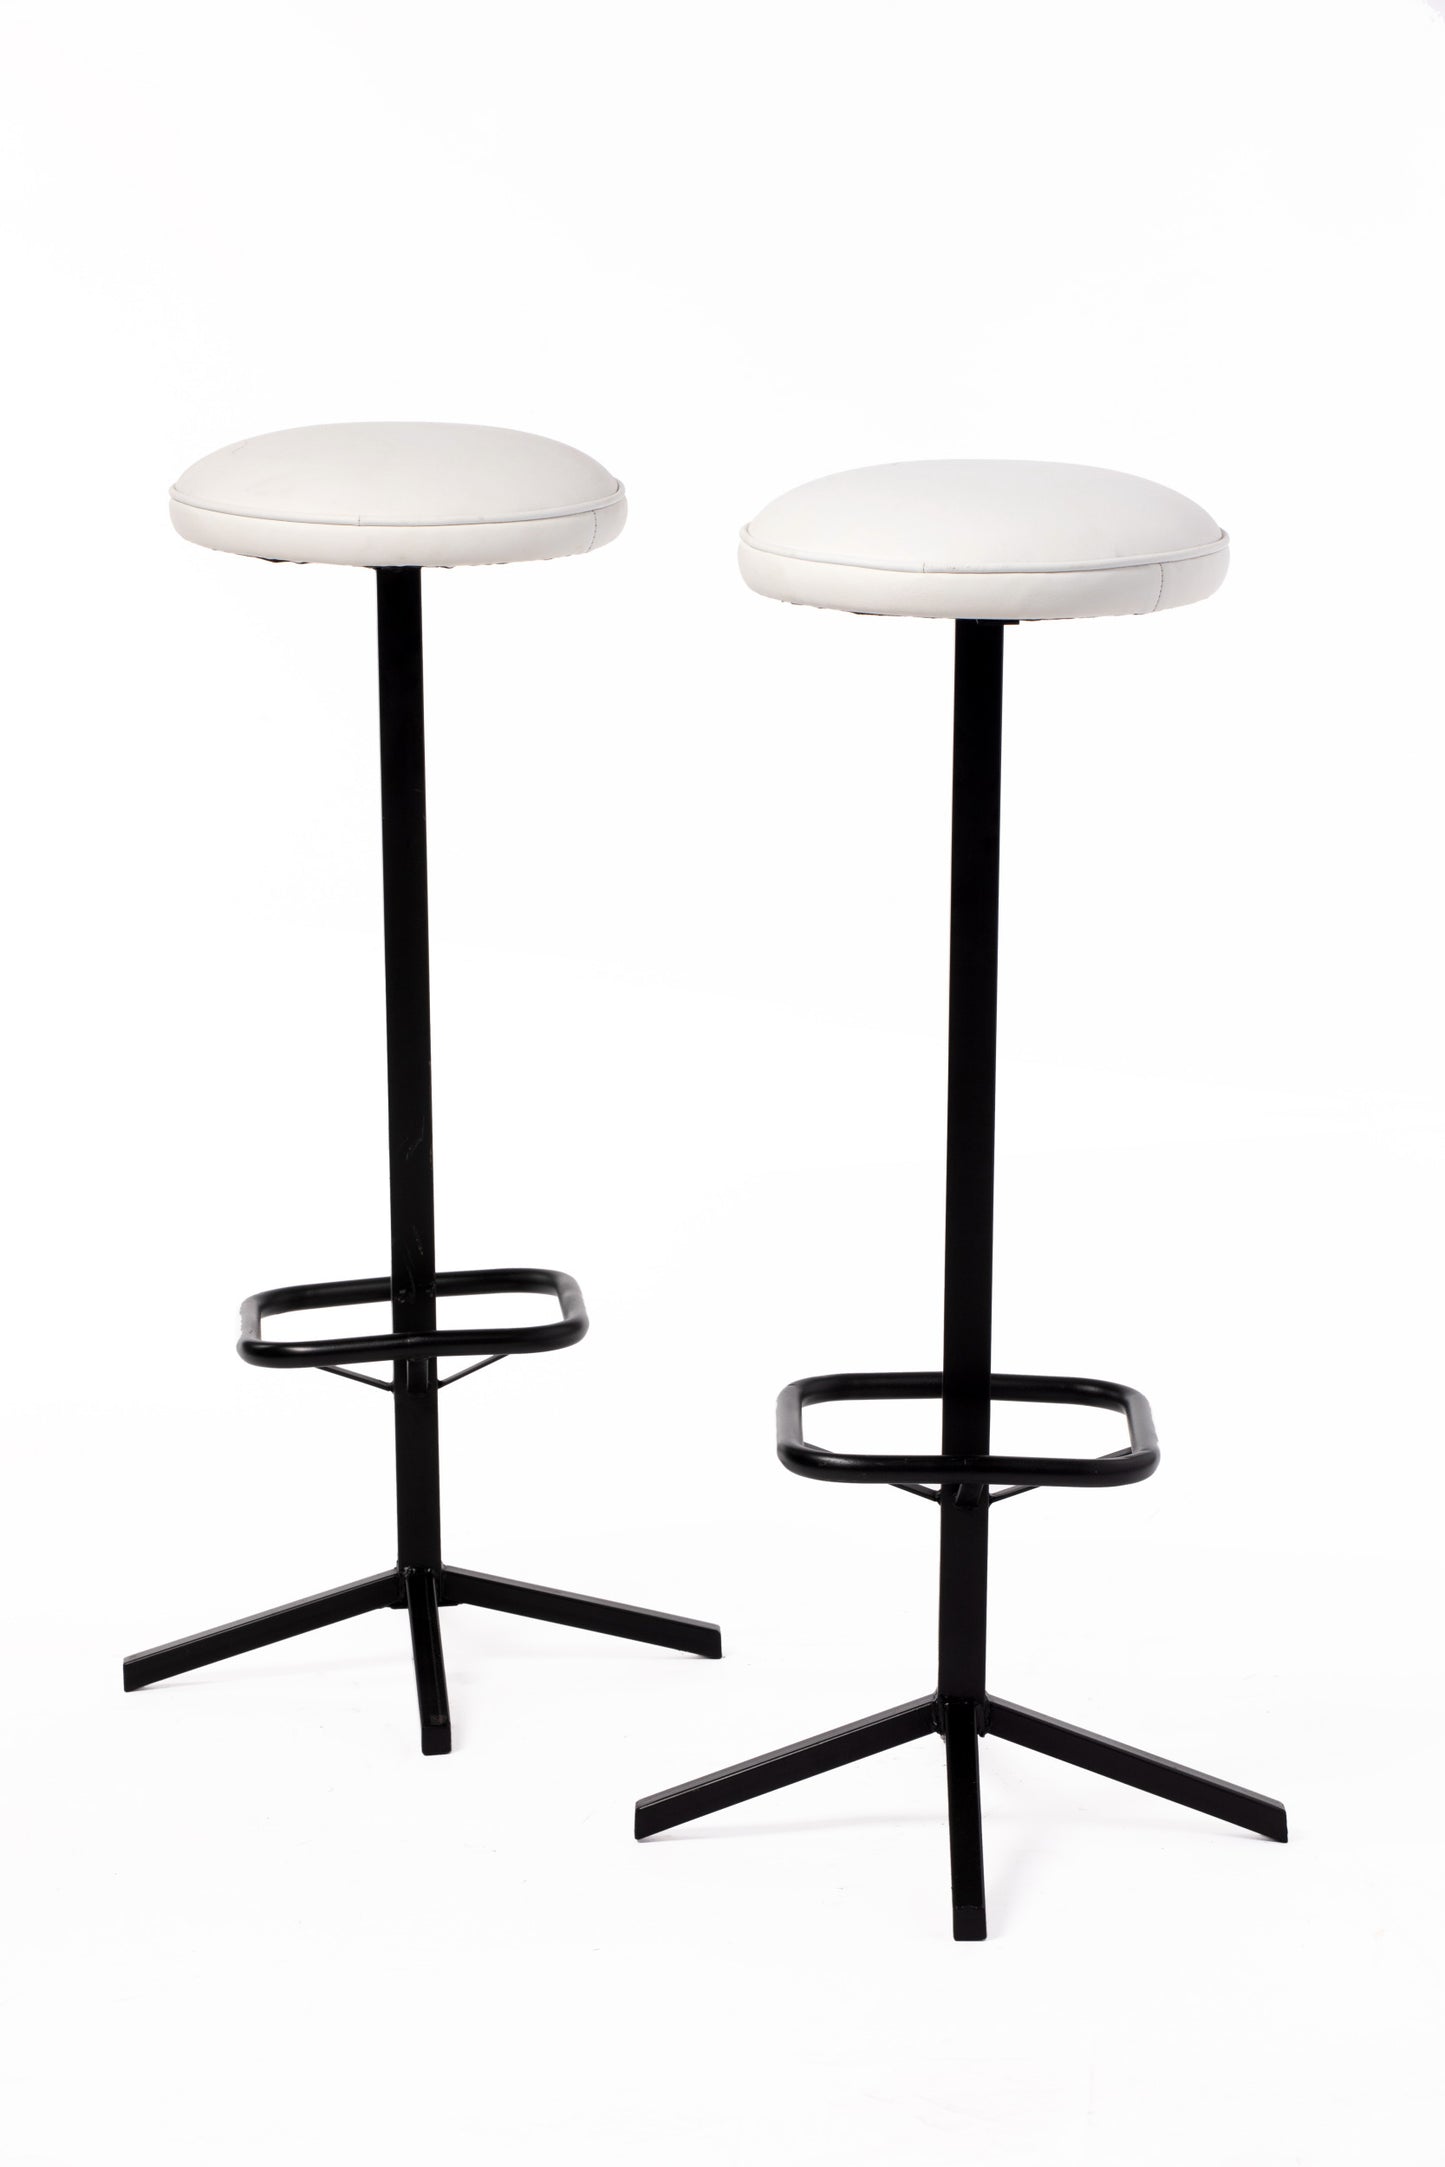 Pair of stools from the 70s